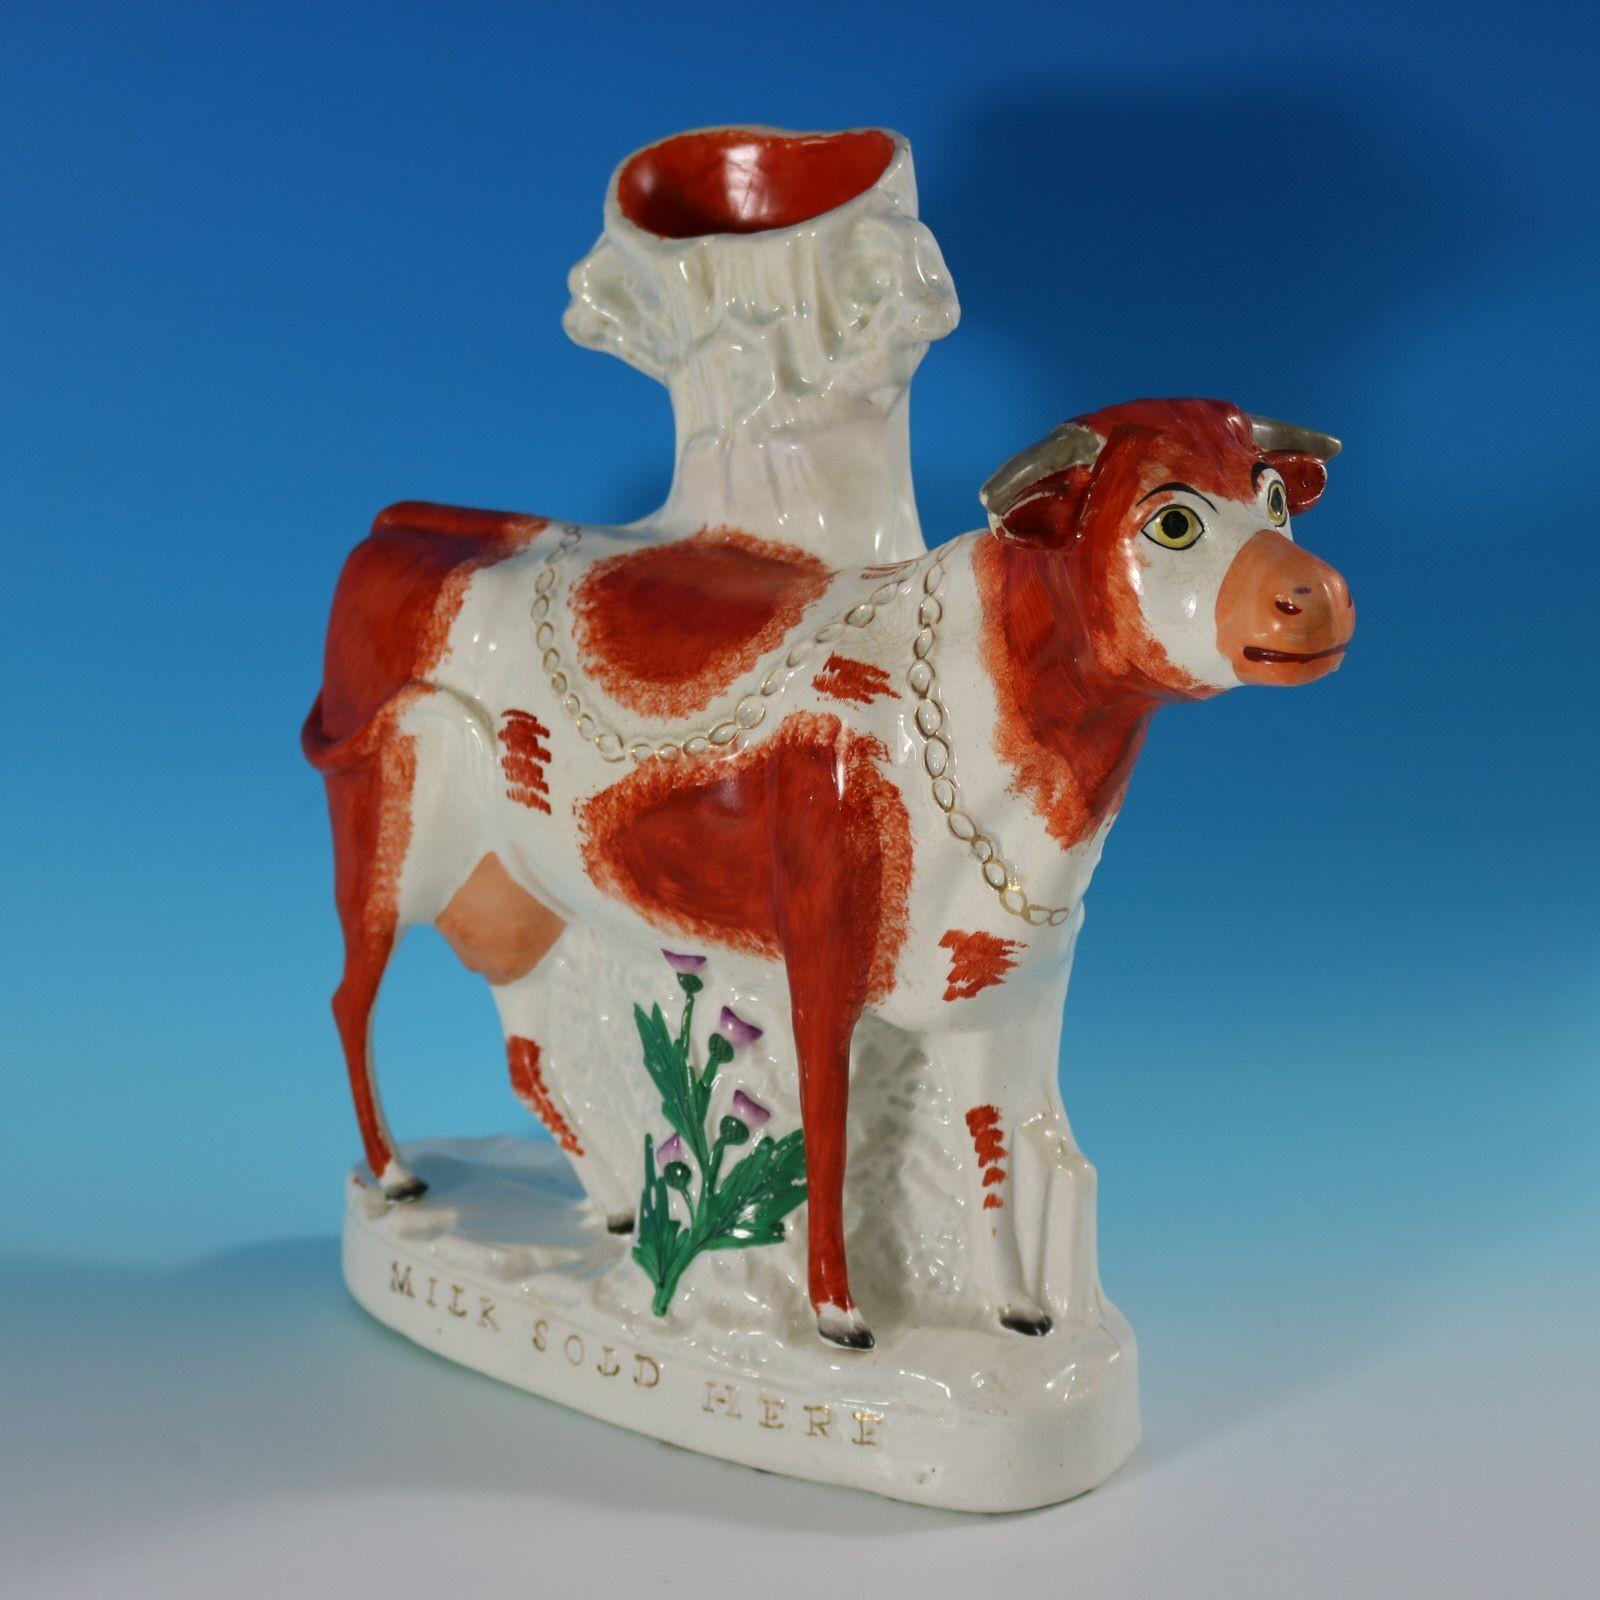 Staffordshire Pottery spill vase with a pastoral theme which features a cow, stood on an oval base. A thistle grows from under the cow. The piece is titled, 'MILK SOLD HERE'. Russet and white version. Dull gilt title and embellishment. Flatback,